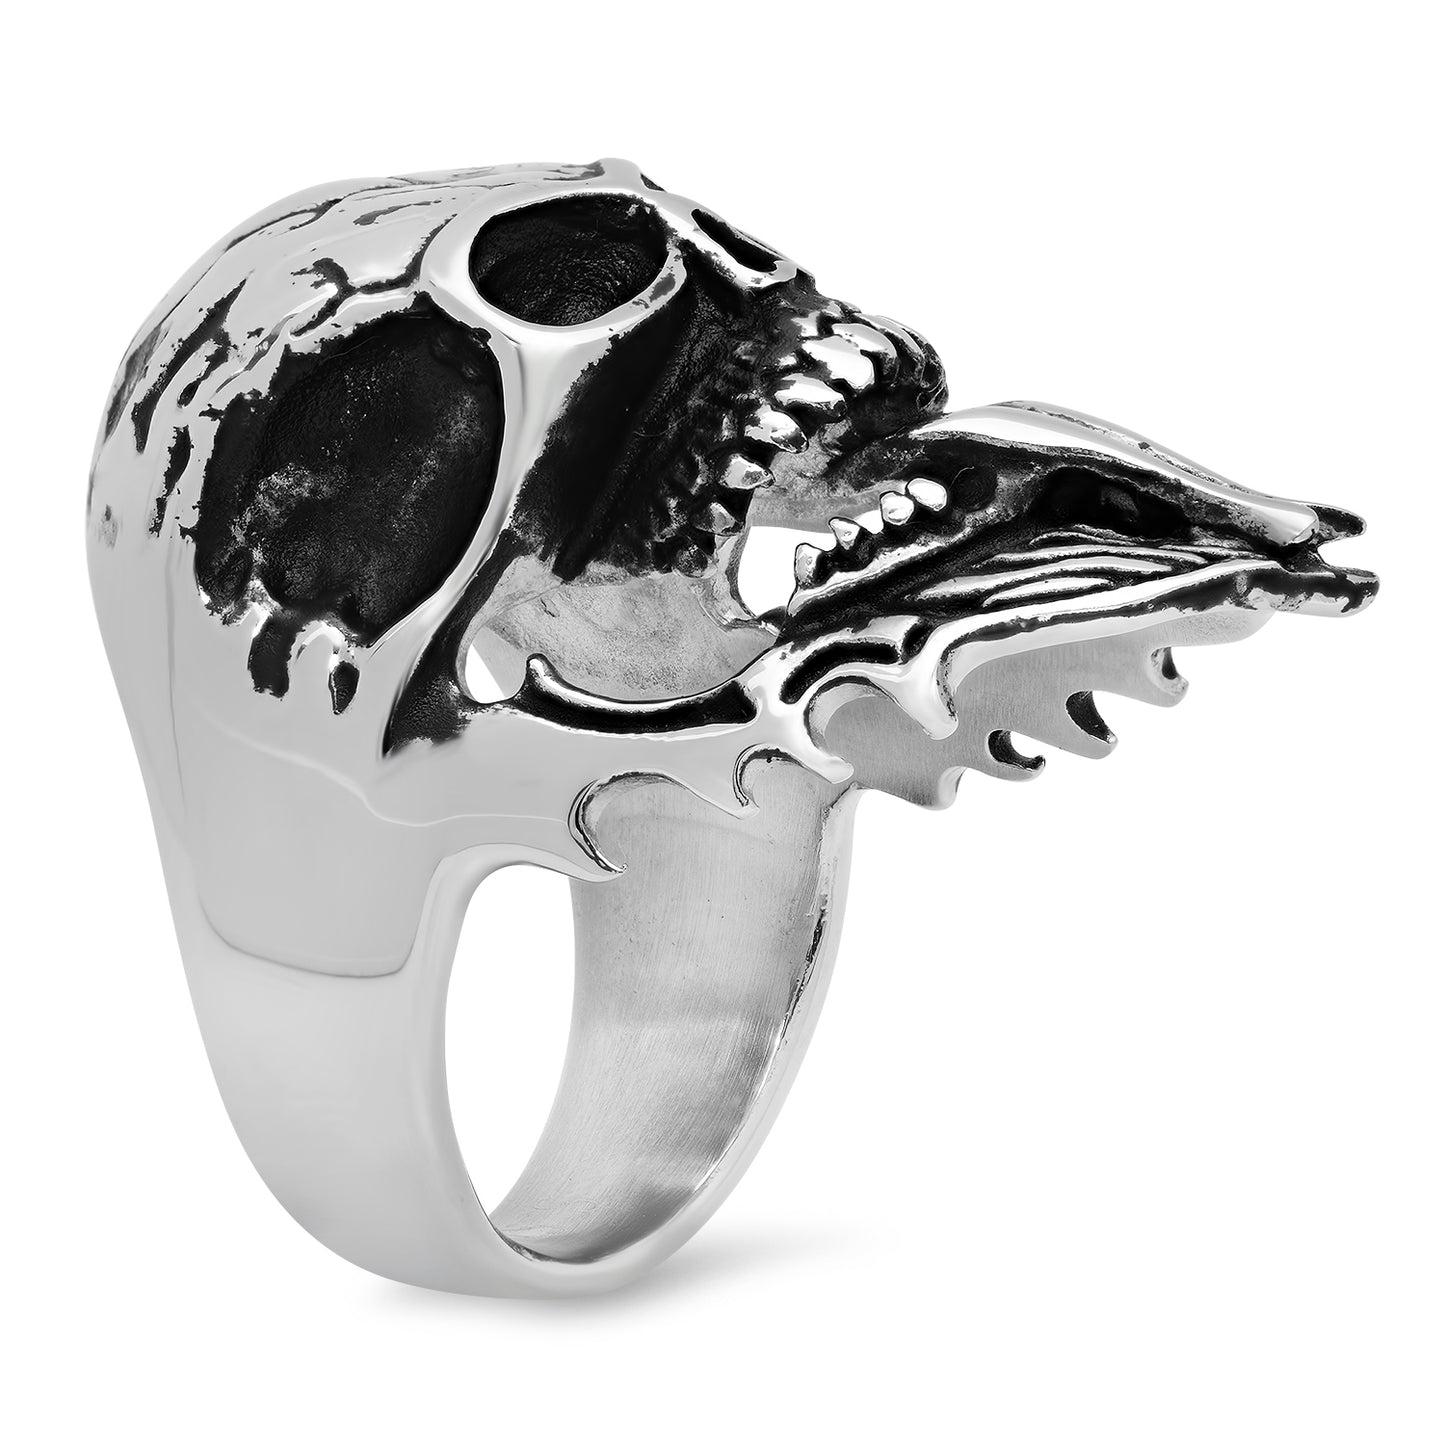 Stainless Steel Skull w/Stuck-Out Tongue Ring + Microfiber (SKU: ST-SKR120)